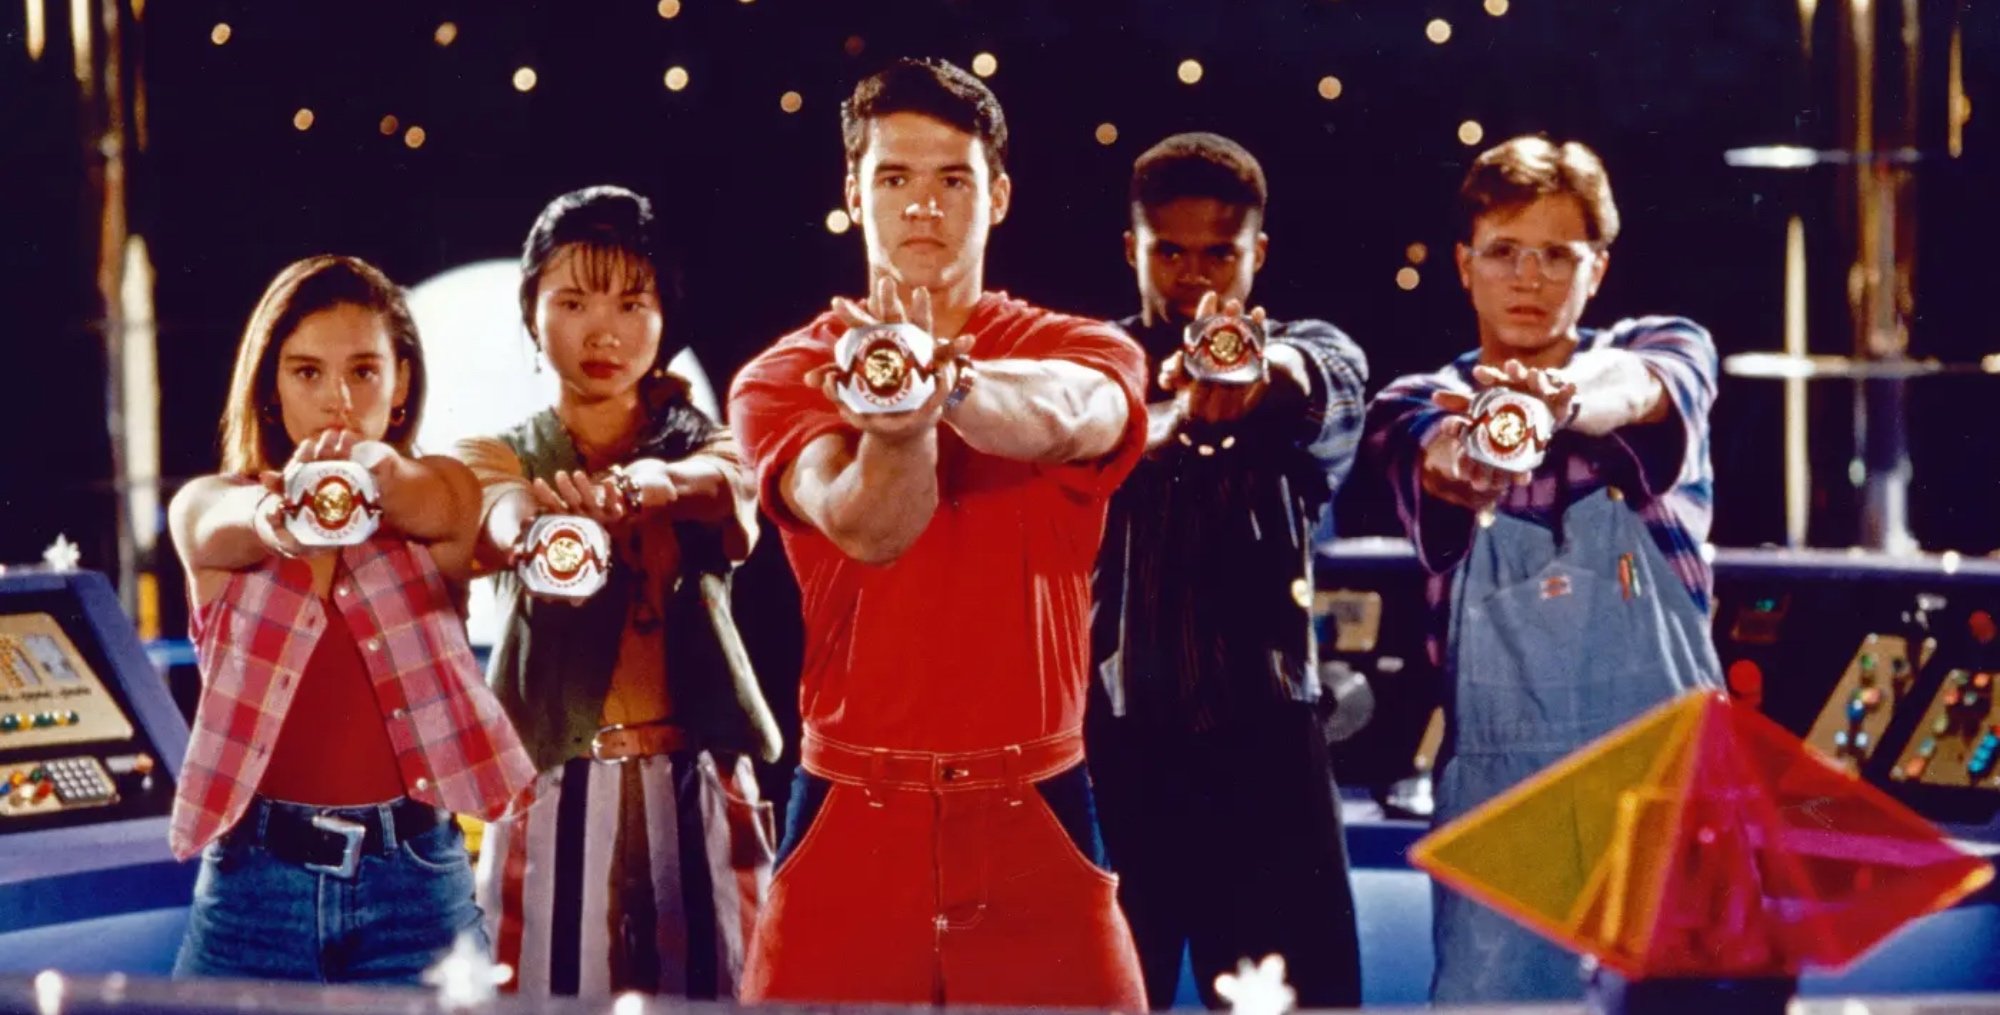 David Yost and the cast of 'Mighty Morphin Power Rangers' holding out Morphers in command center.